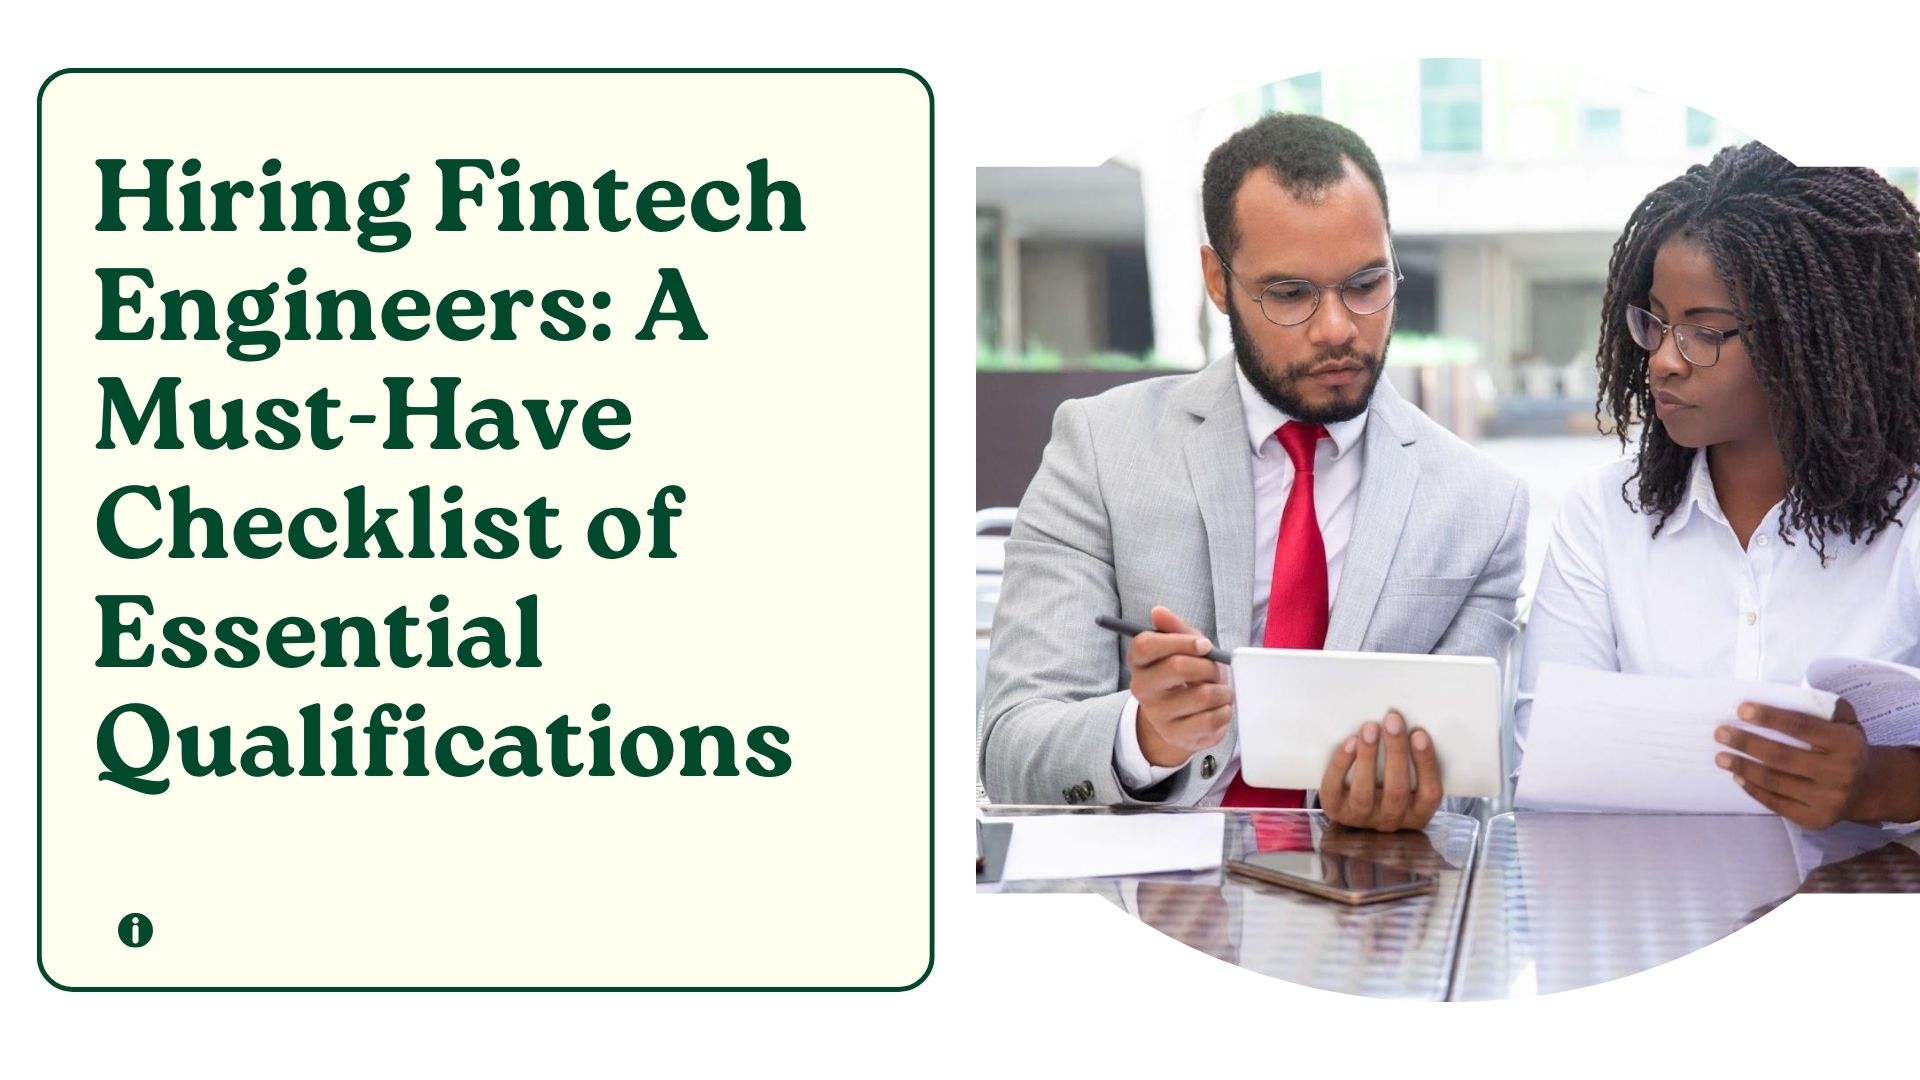 Hiring Fintech Engineers: Checklist of Essential Qualifications